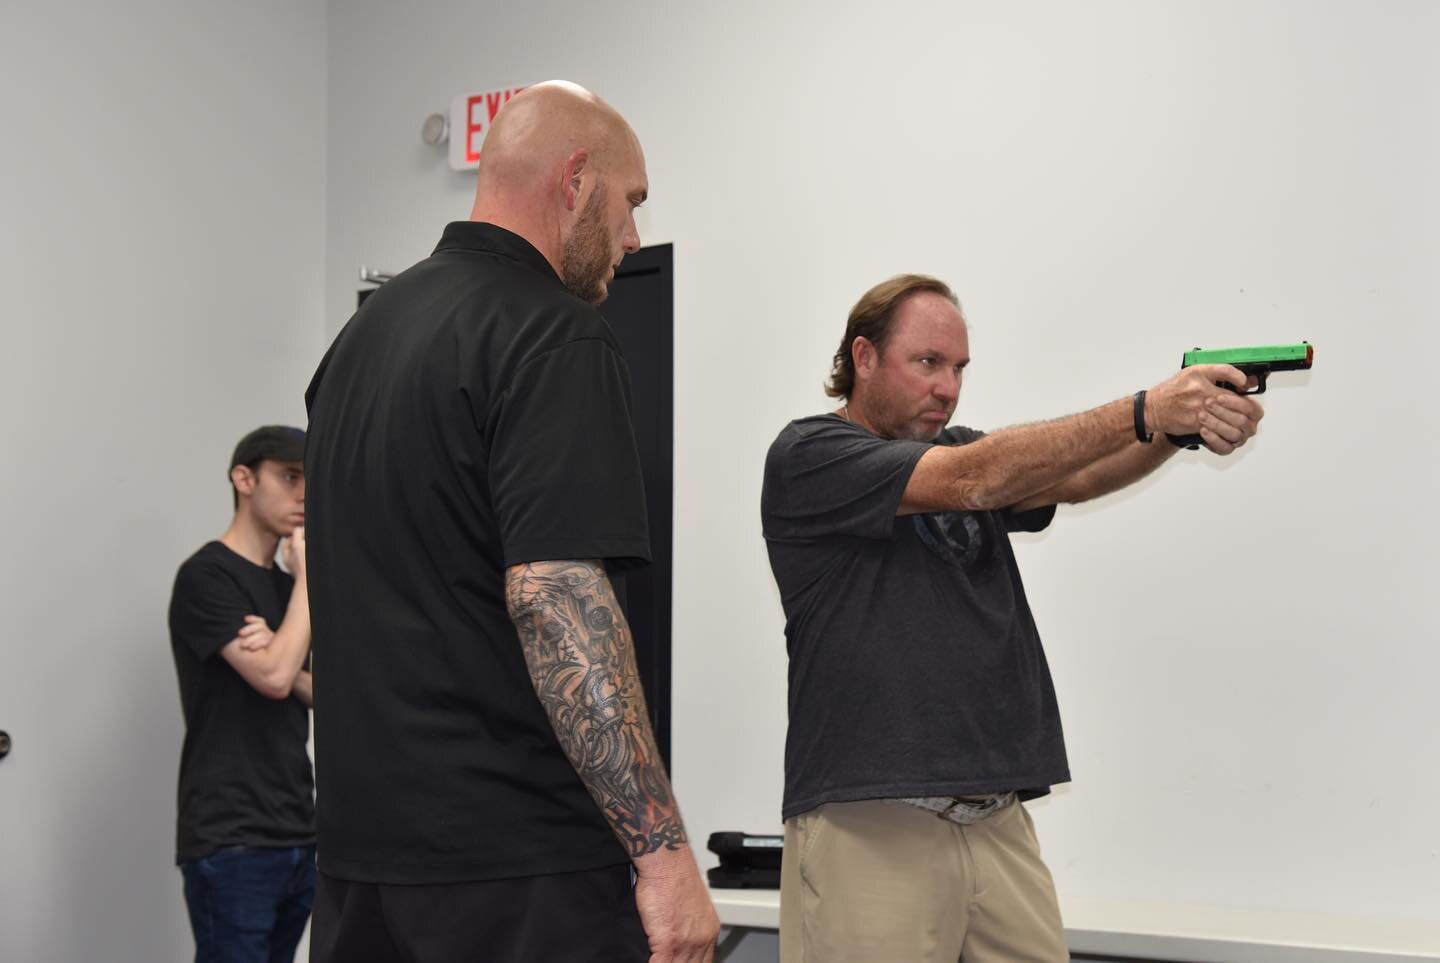 Our Introduction to pistol  class this Thursday still has some spots left! 

This is a great opportunity for someone who has very little to no shooting experience with a pistol. All that&rsquo;s necessary to bring to class is a willingness to learn a